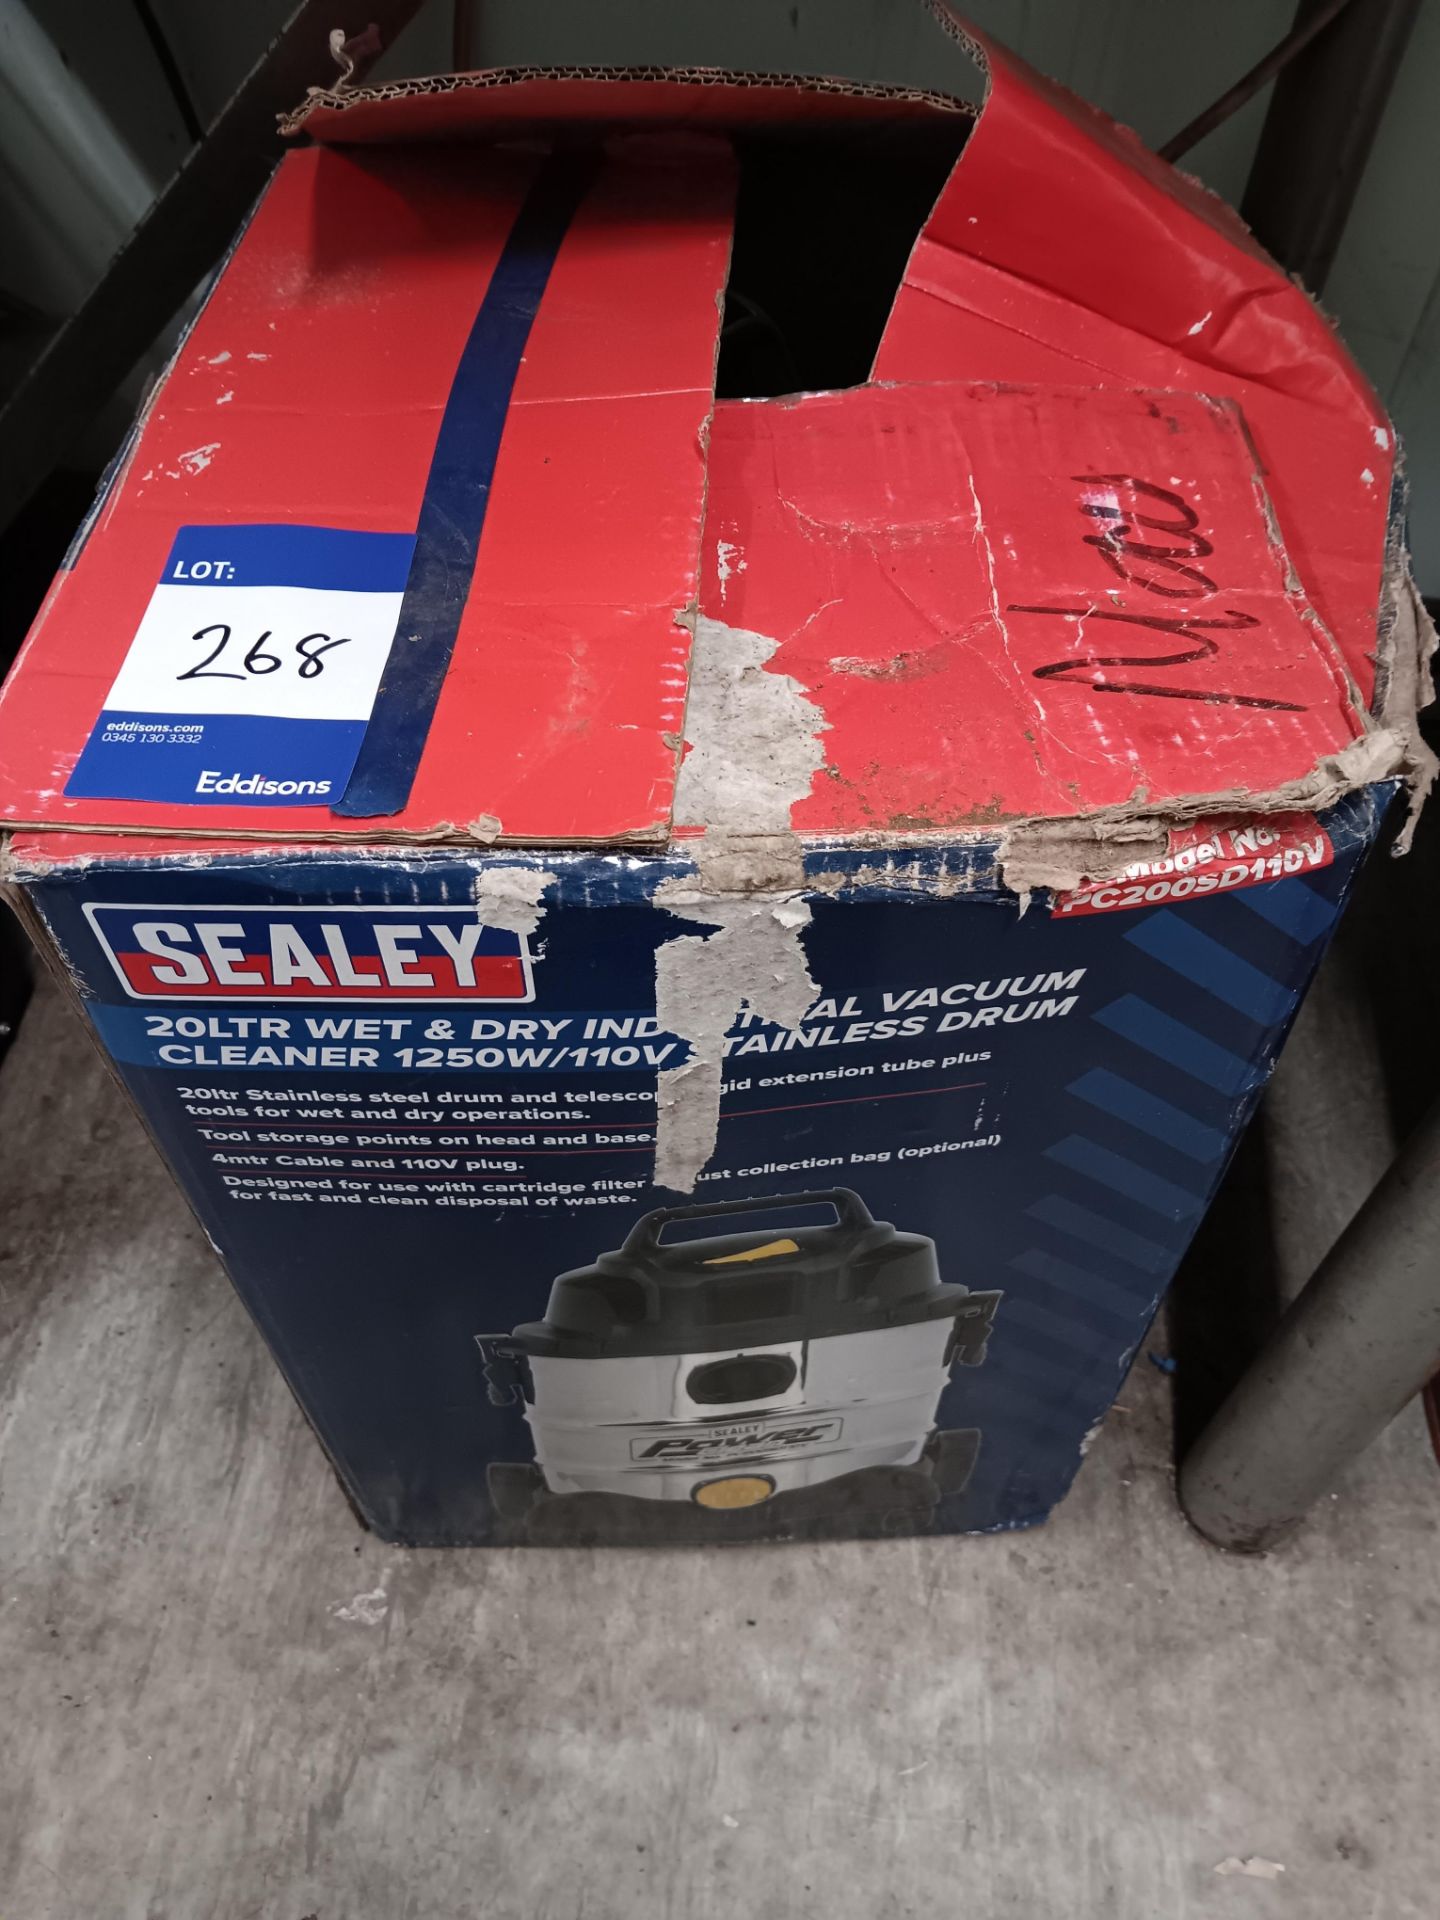 Sealey 20 Ltr wet and dry vacuum cleaner